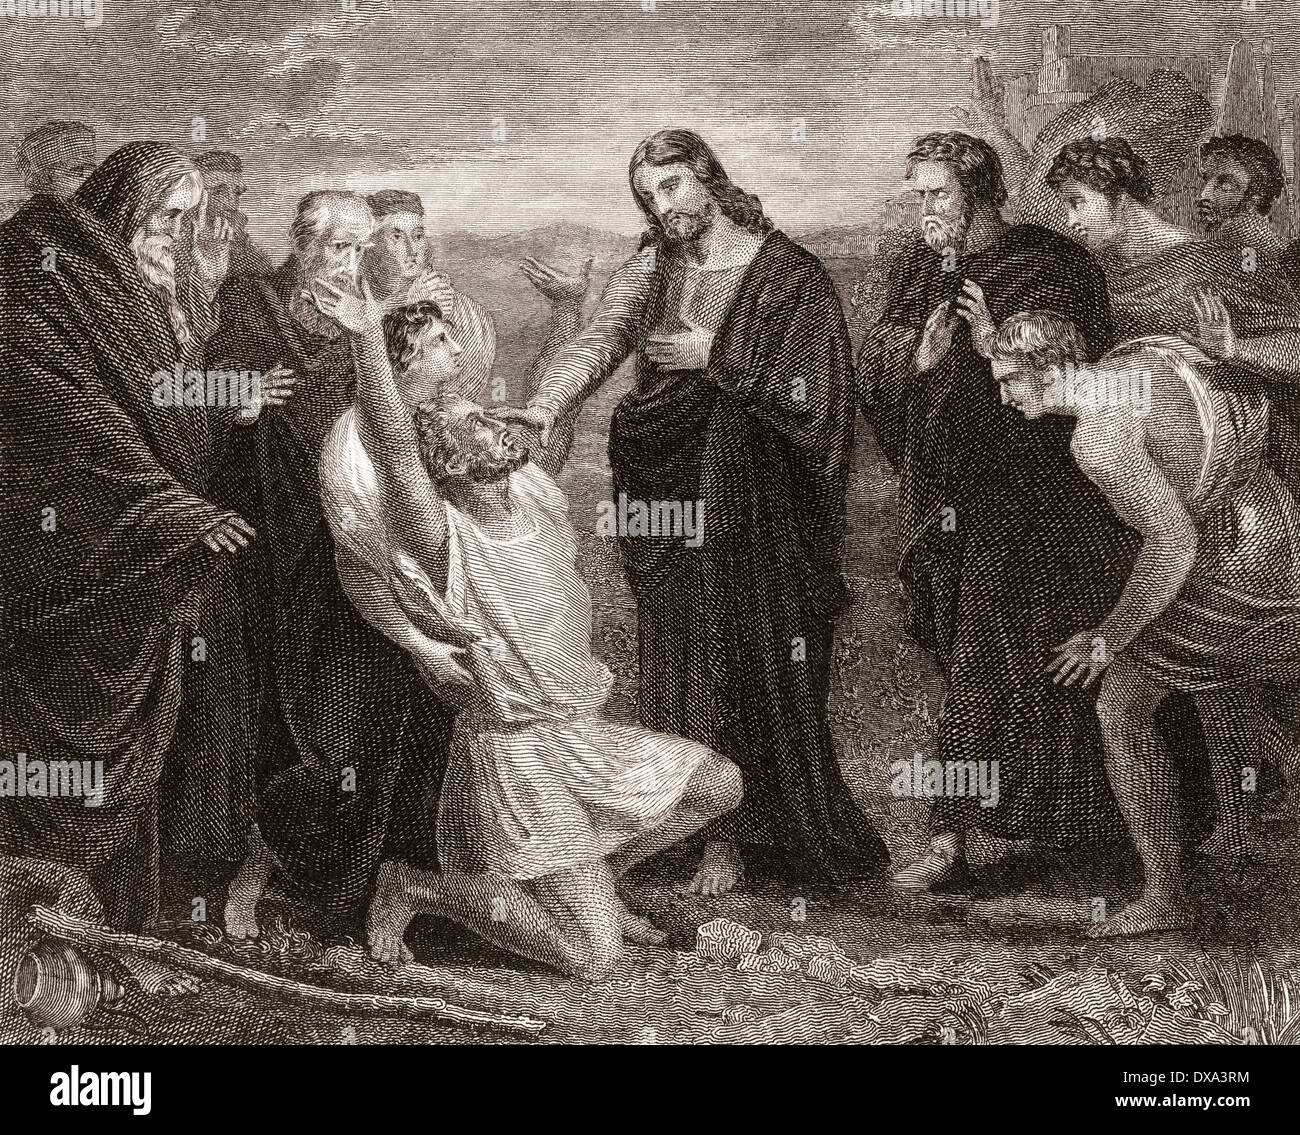 Jesus healing the blind. From a 19th century print. Stock Photo